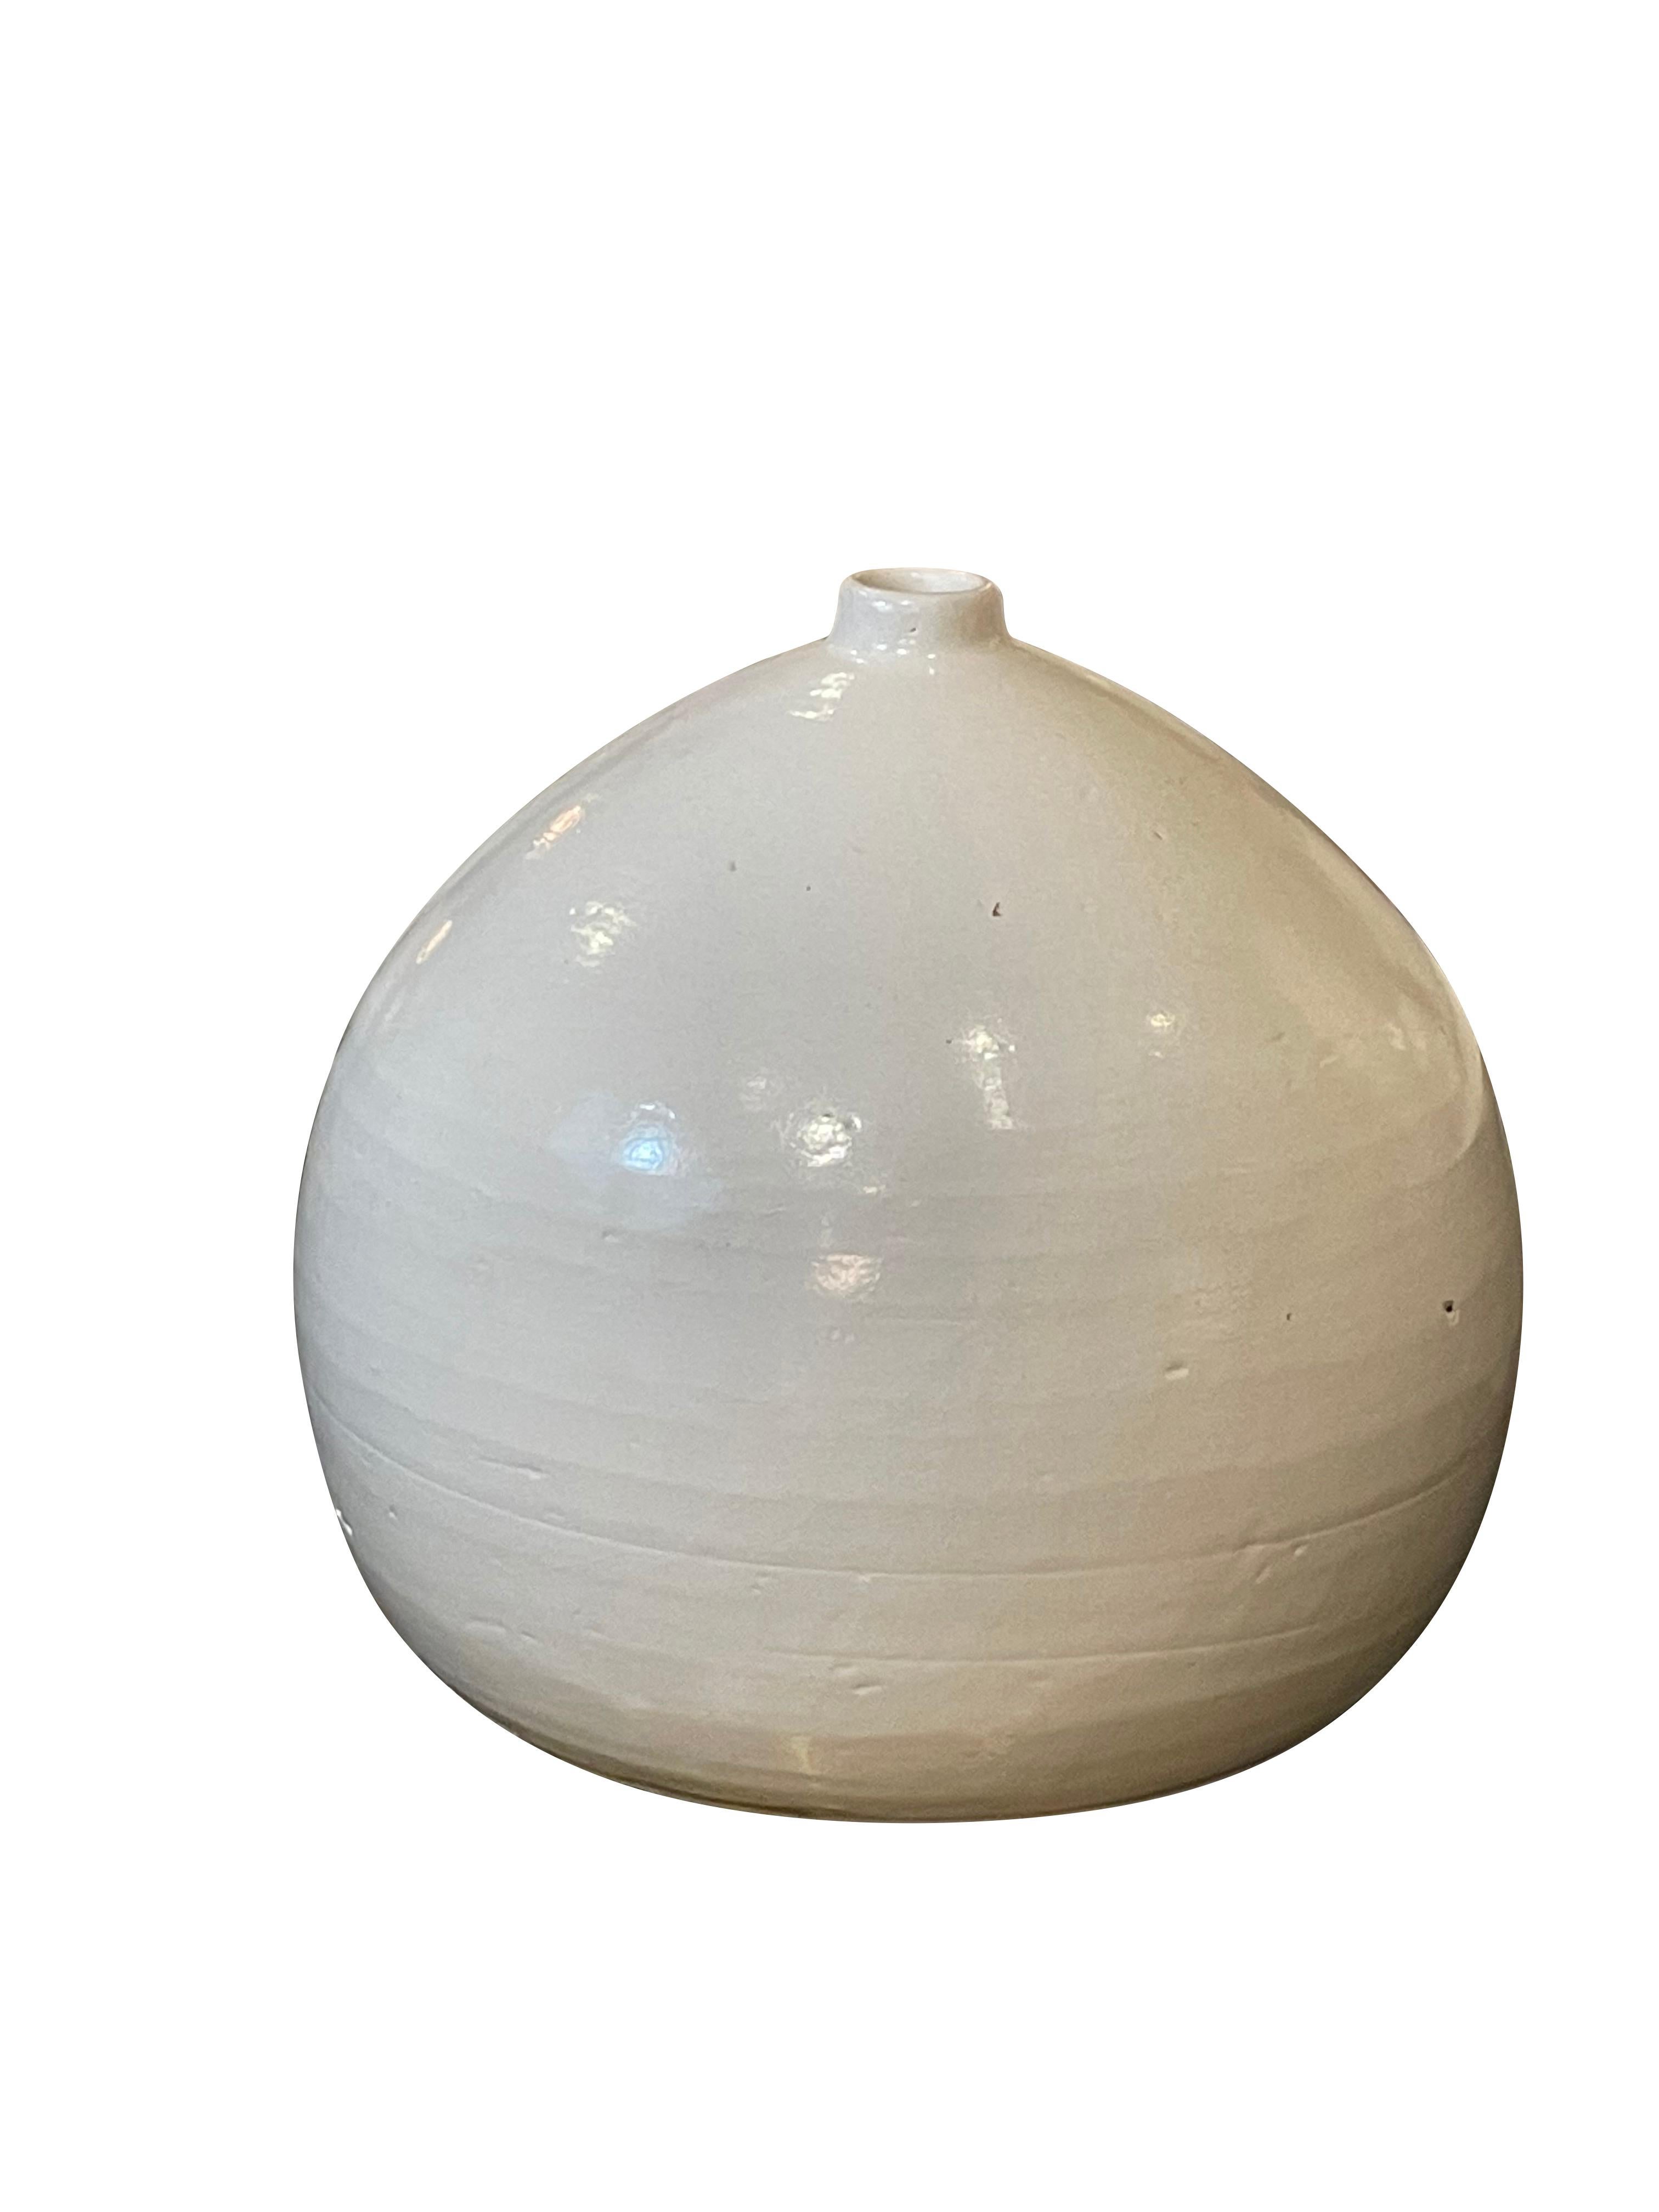 Contemporary Chinese large cream vase with small spout opening. 
Part of a large collection of cream vases.
Many sizes and shapes available.
